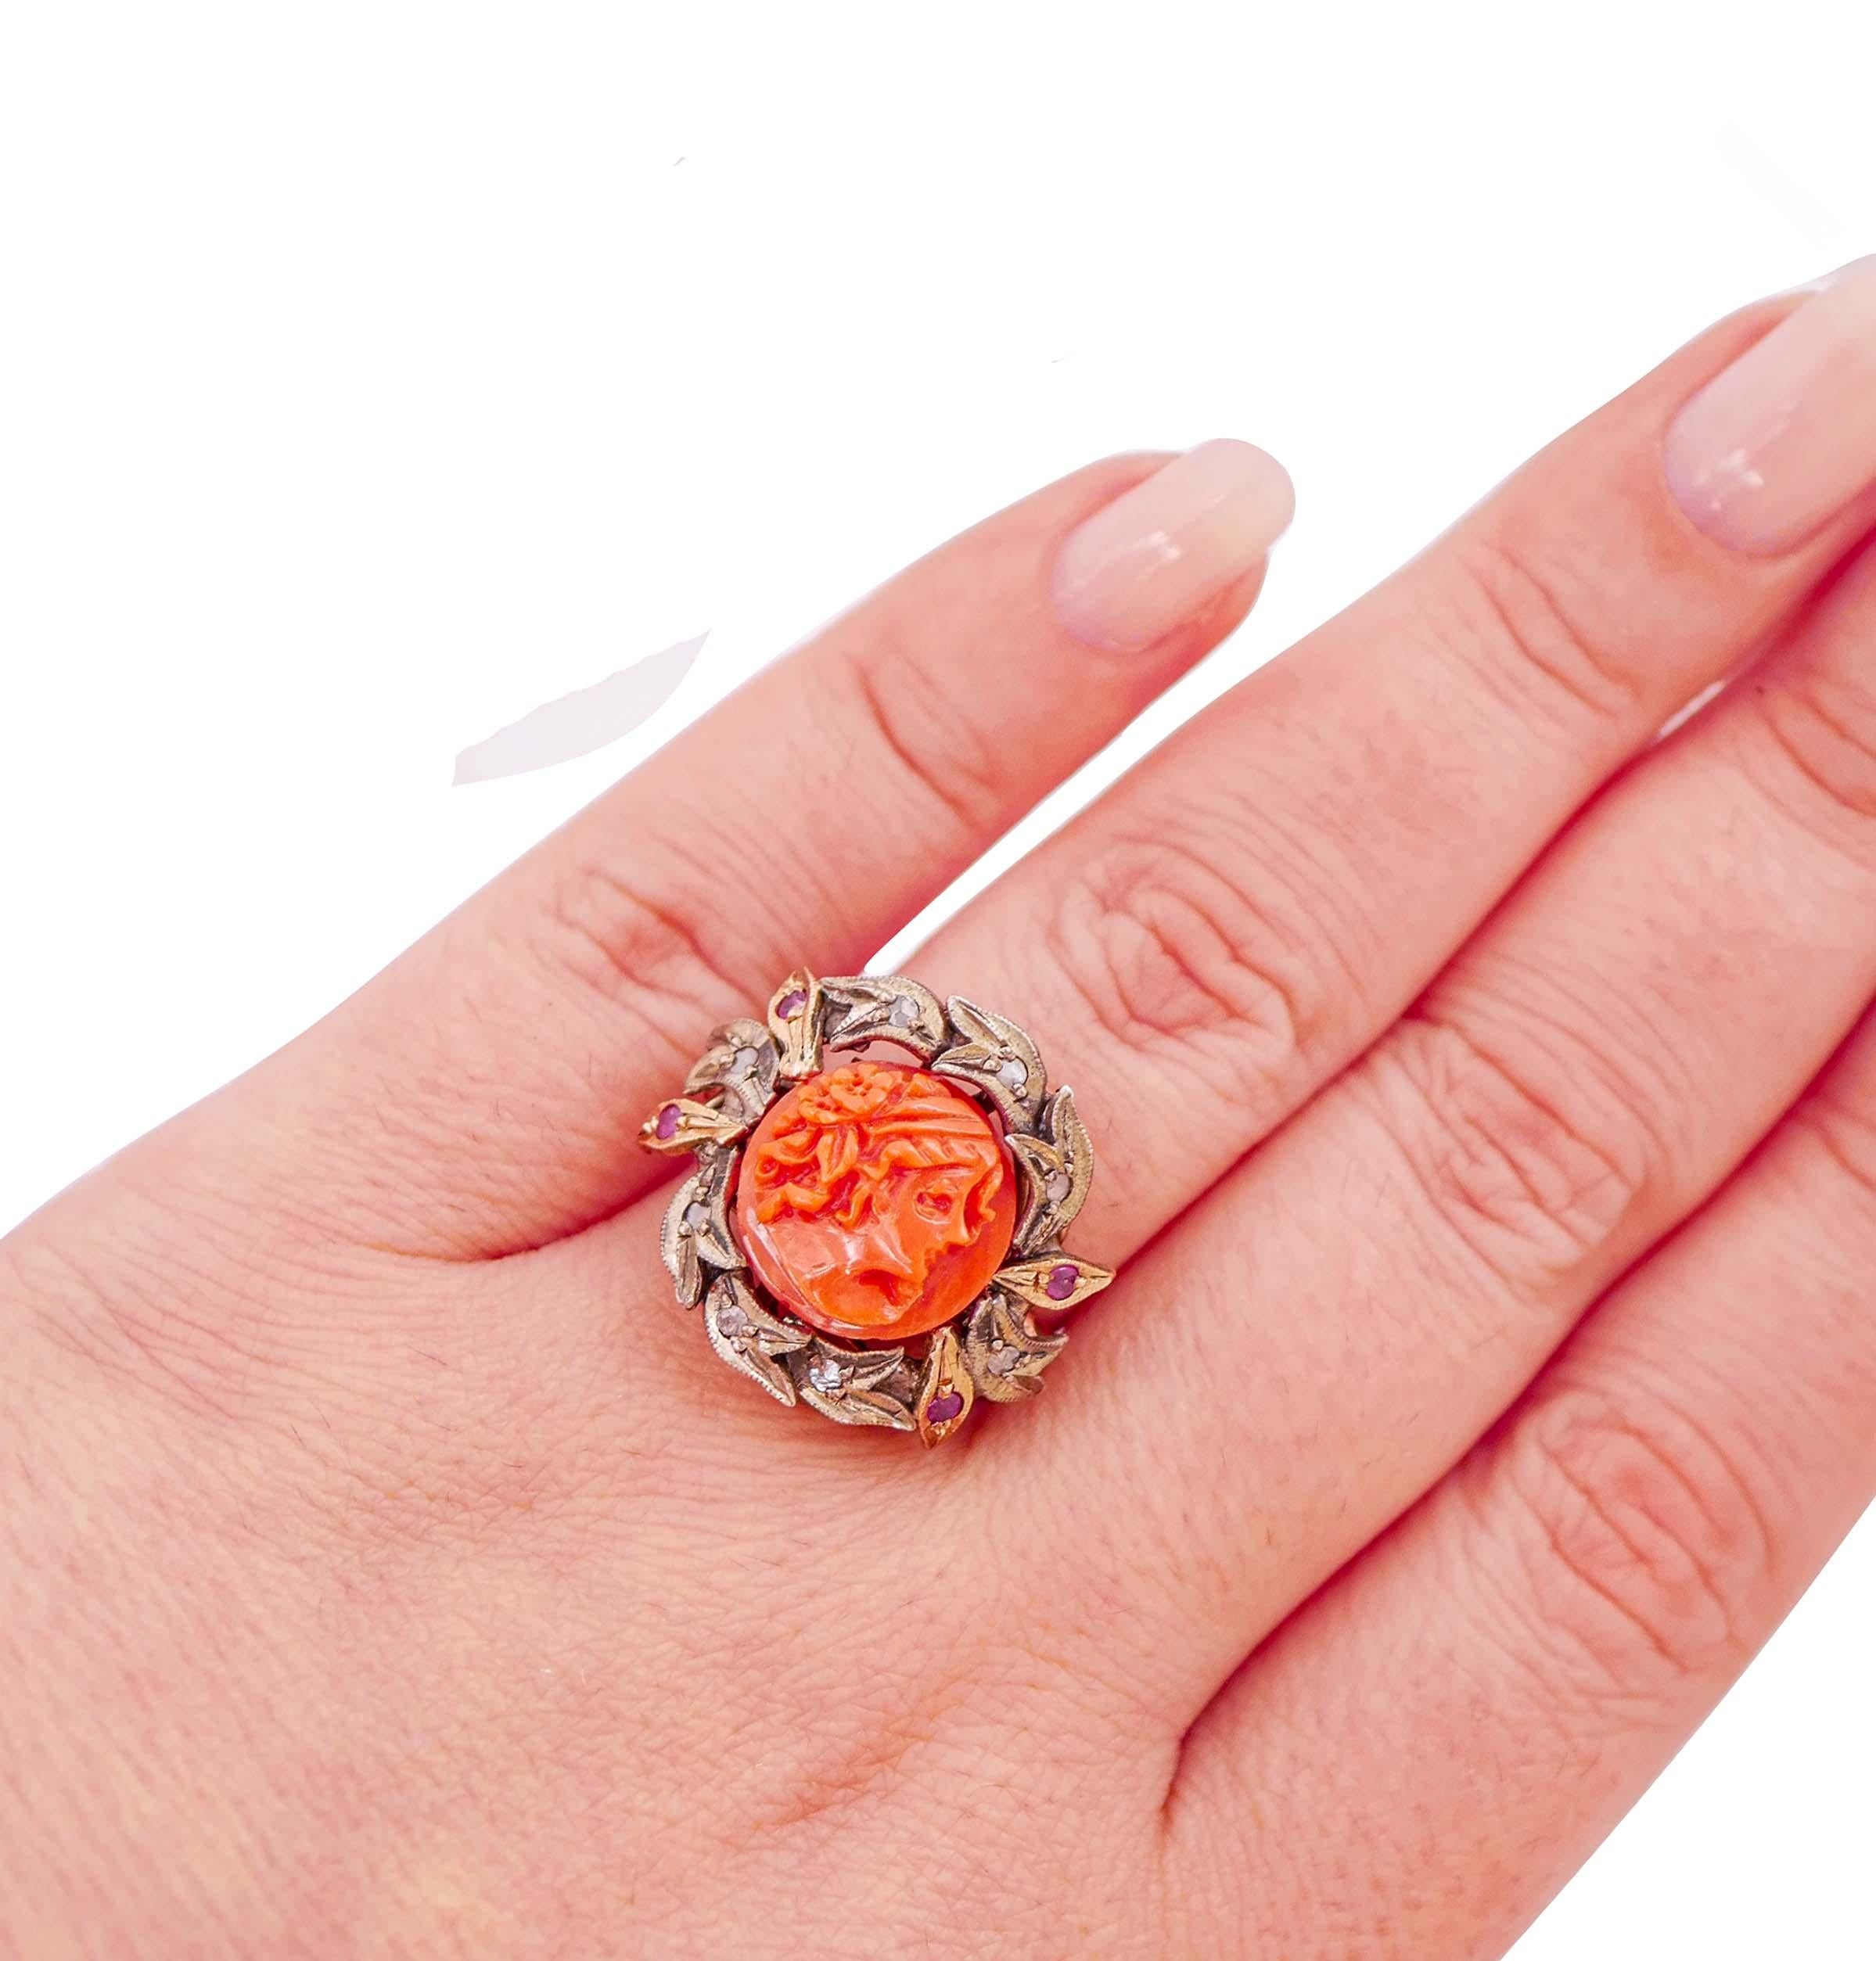 Mixed Cut Coral, Rubies, Diamonds, Rose Gold and Silver Ring. For Sale